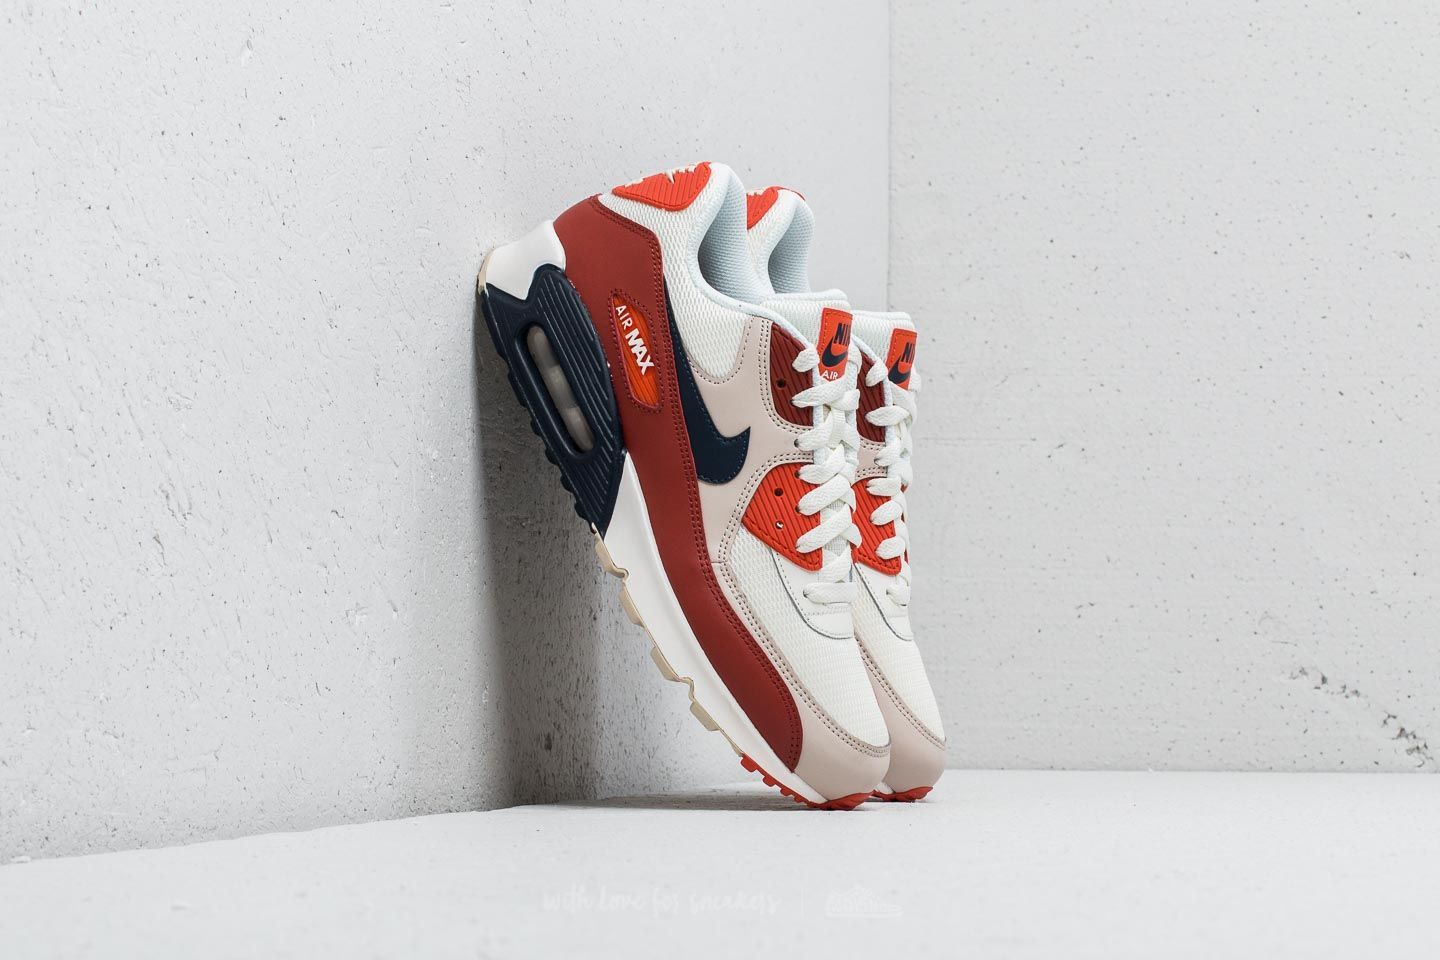 Chaussures et baskets homme Nike Air Max 90 Essential Mars Stone/ Obsidian